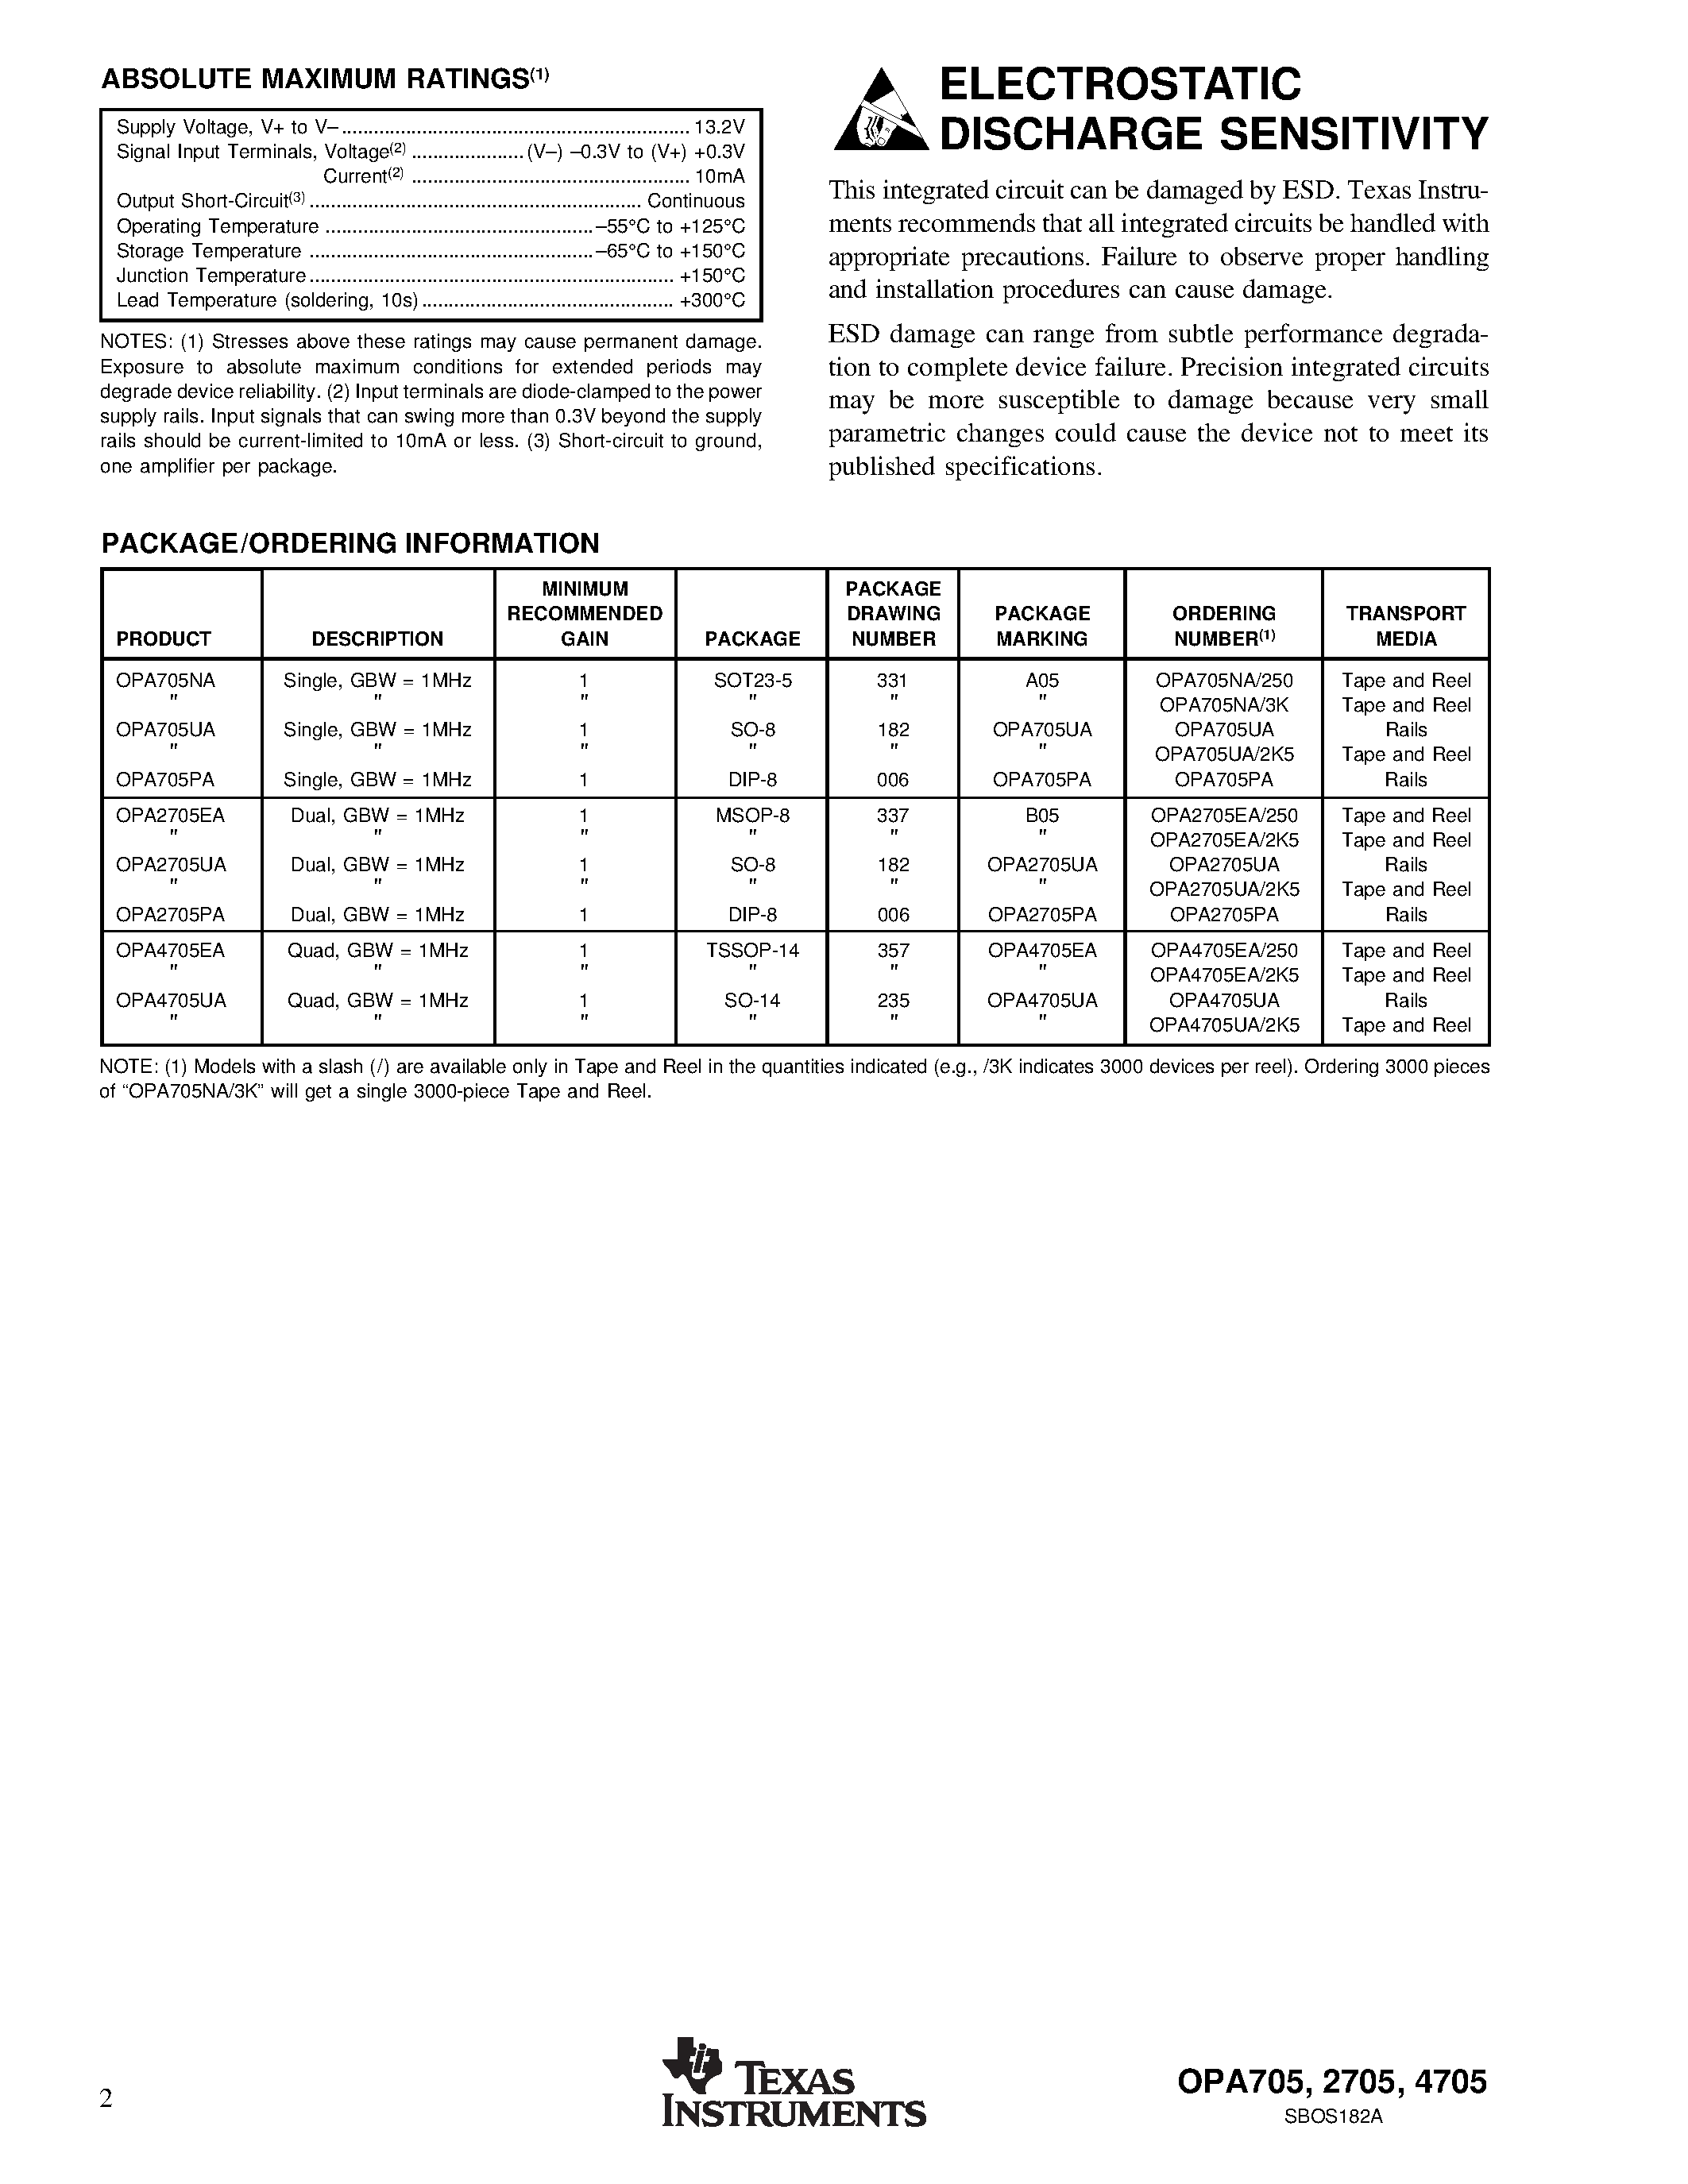 Datasheet OPA4705 - Low-Cost / CMOS / Rail-to-Rail / I/O OPERATIONAL AMPLIFIERS page 2